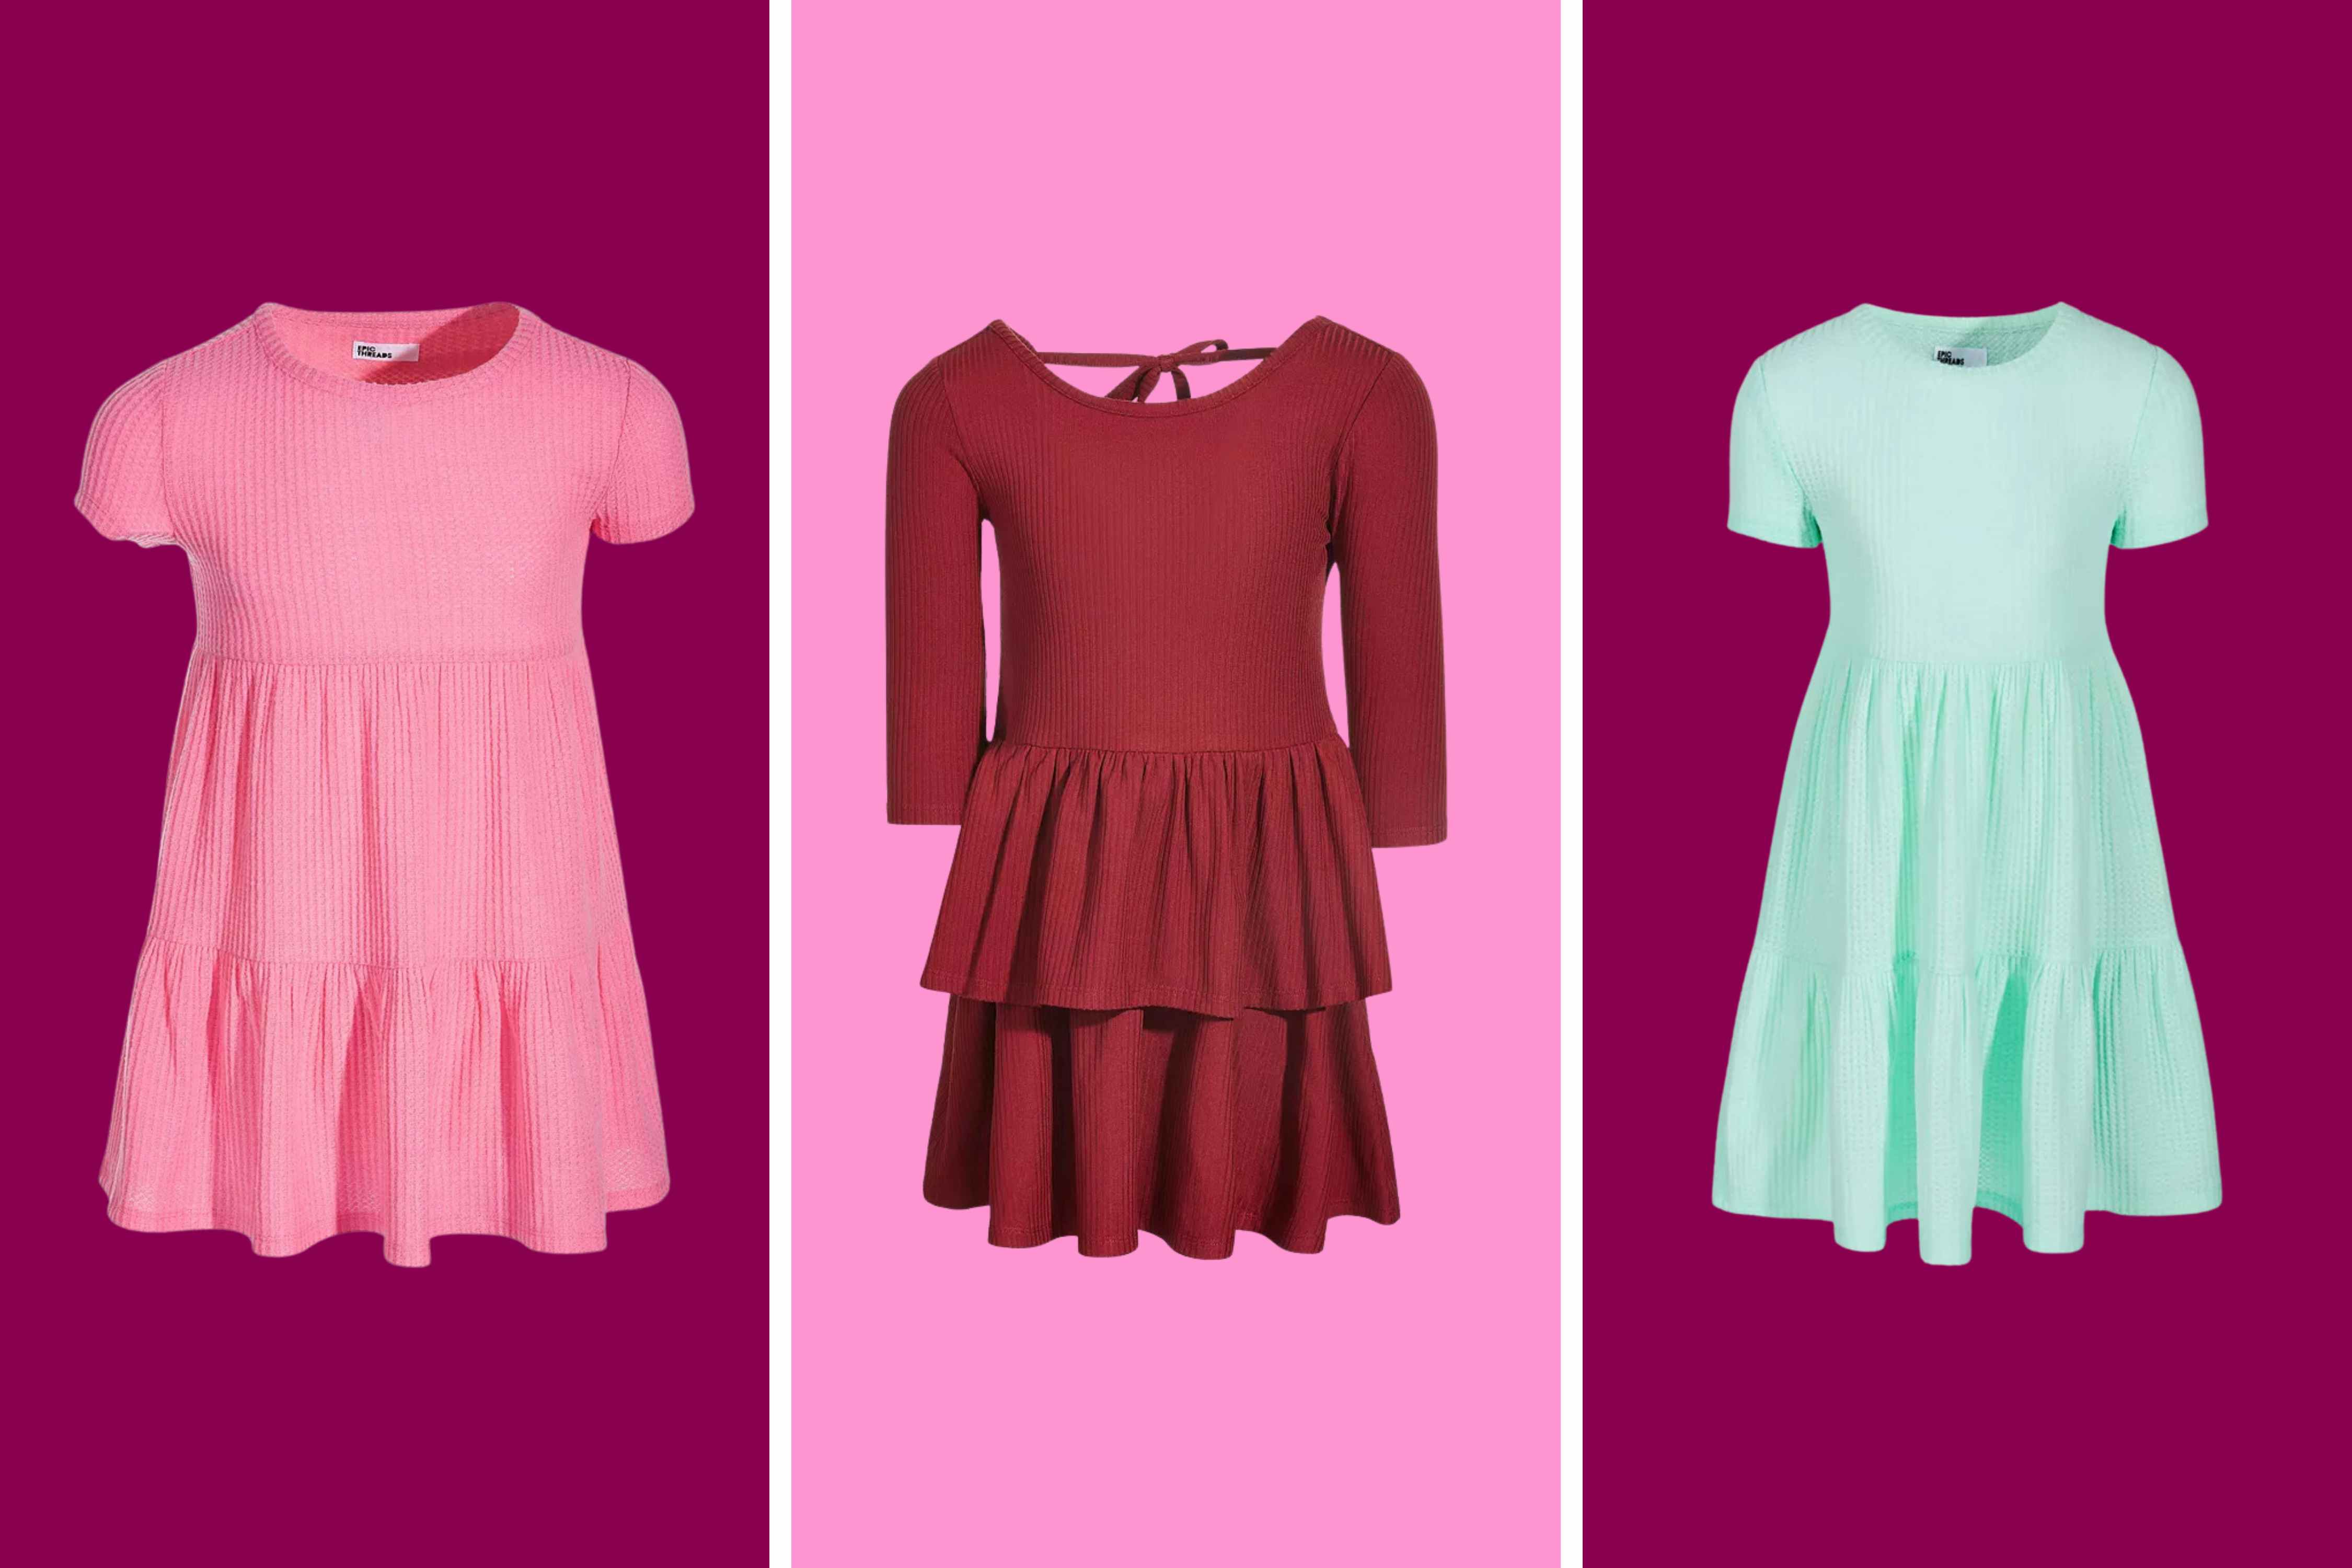 5-Star-Rated Kids' Dresses, Now as Low as $6.36 at Macy's